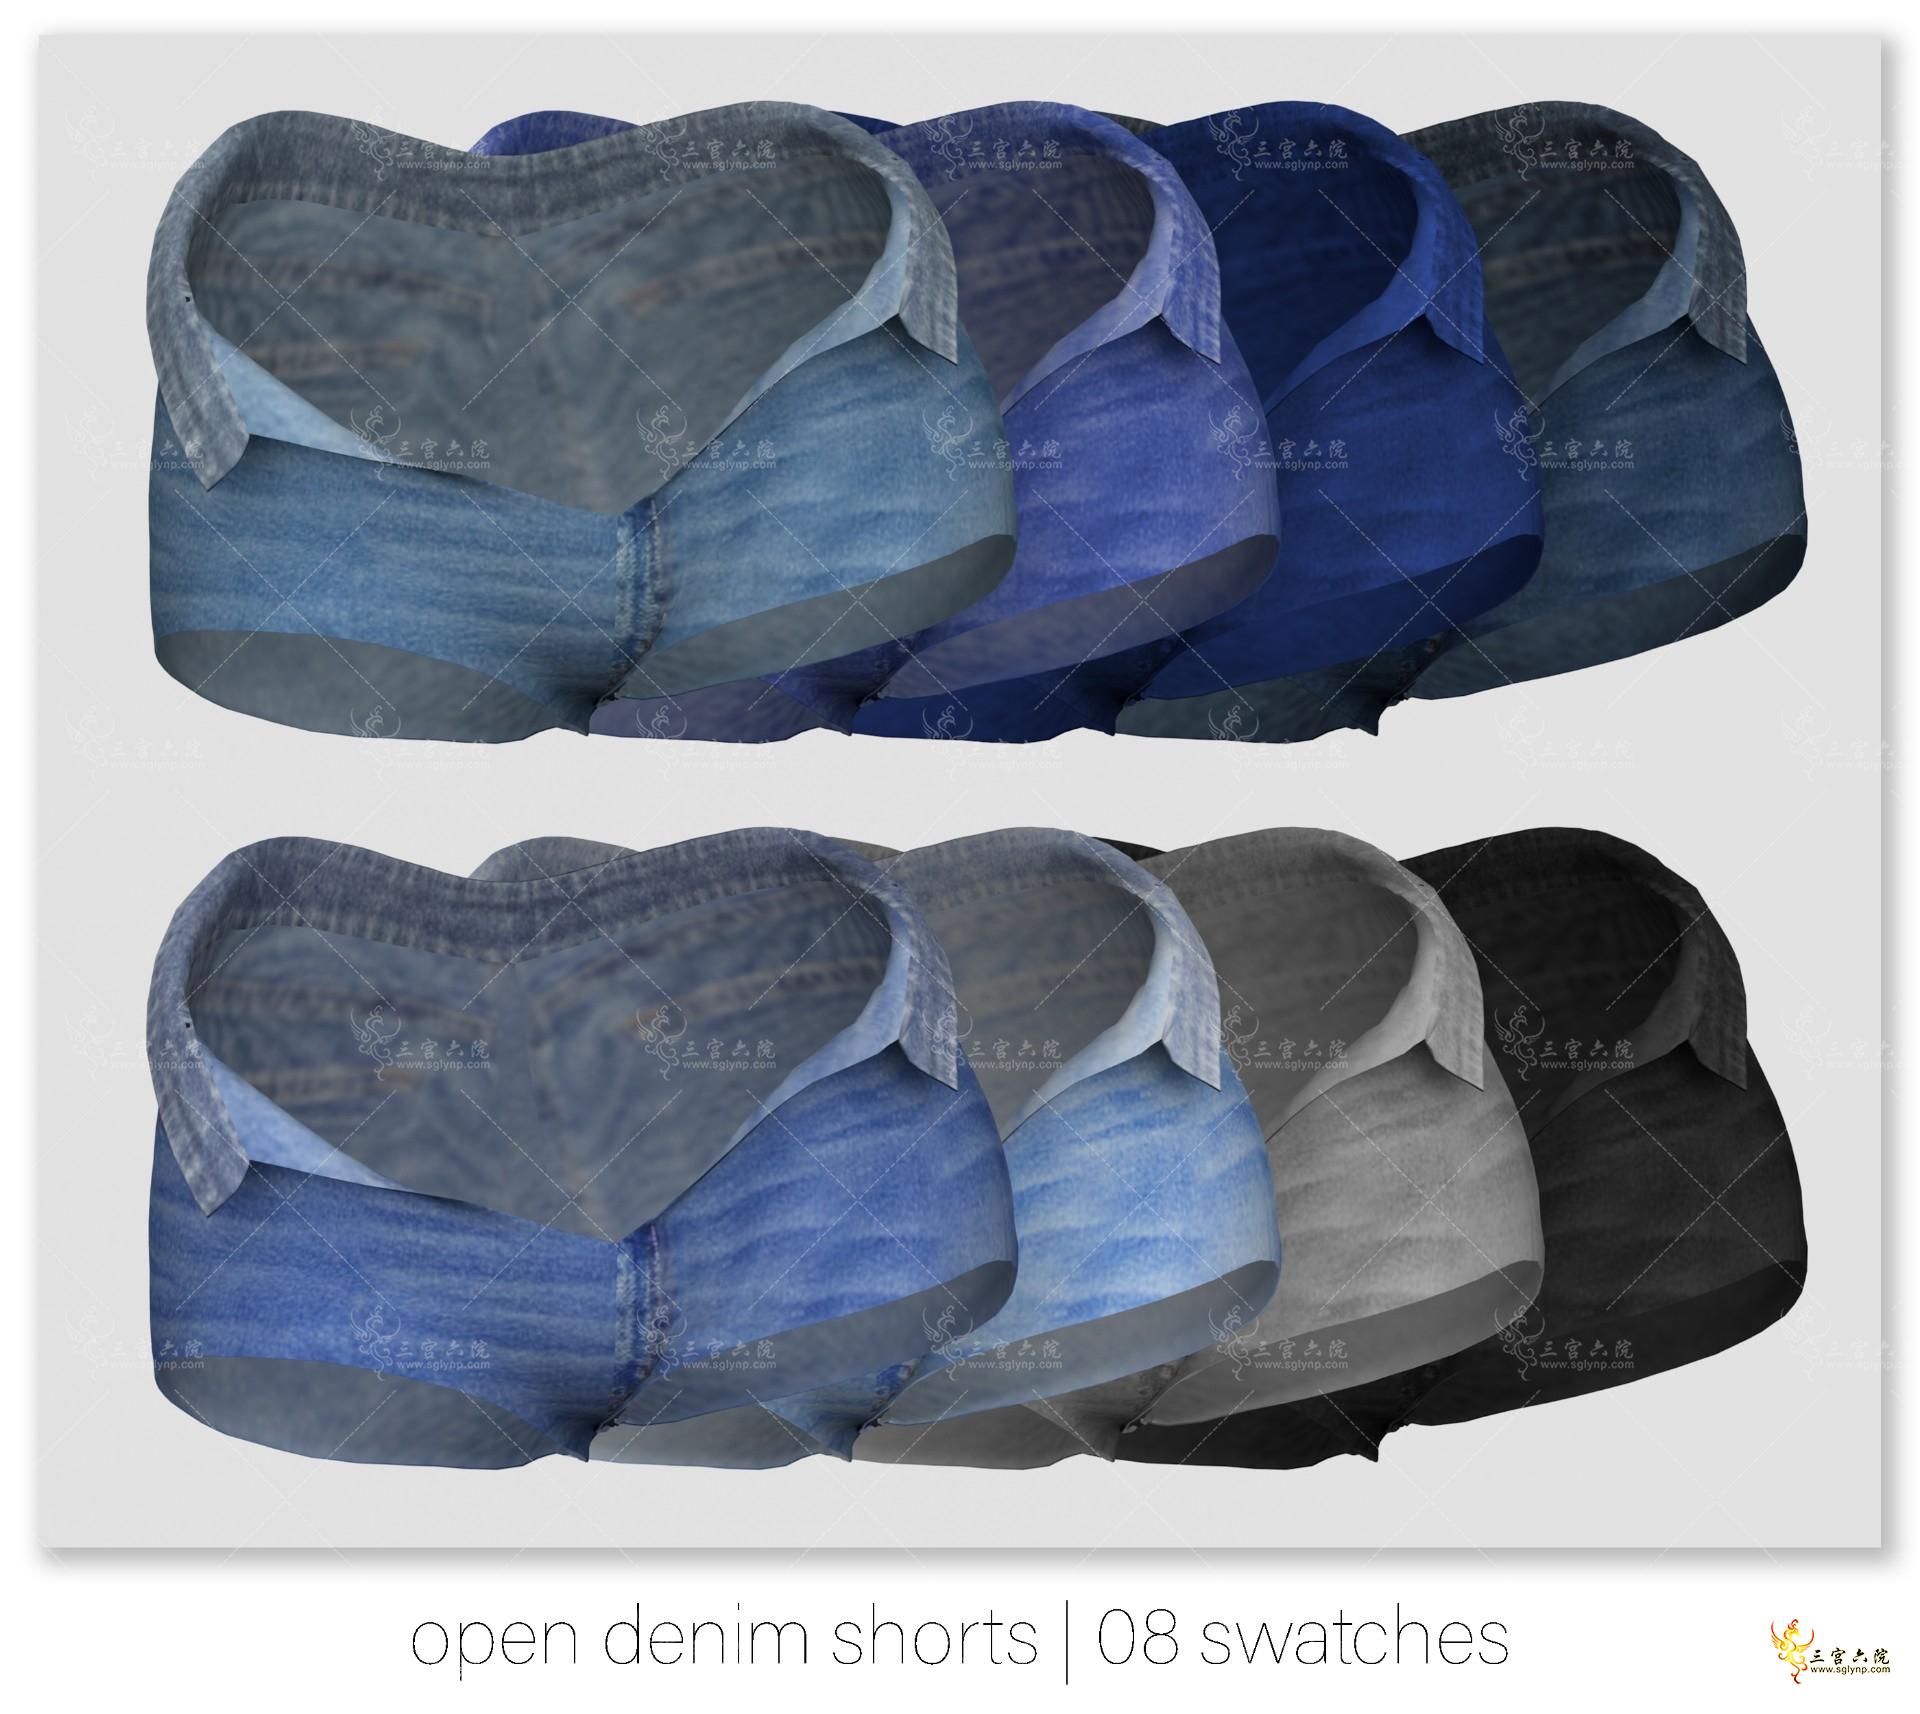 opendenimshorts_swatches.png